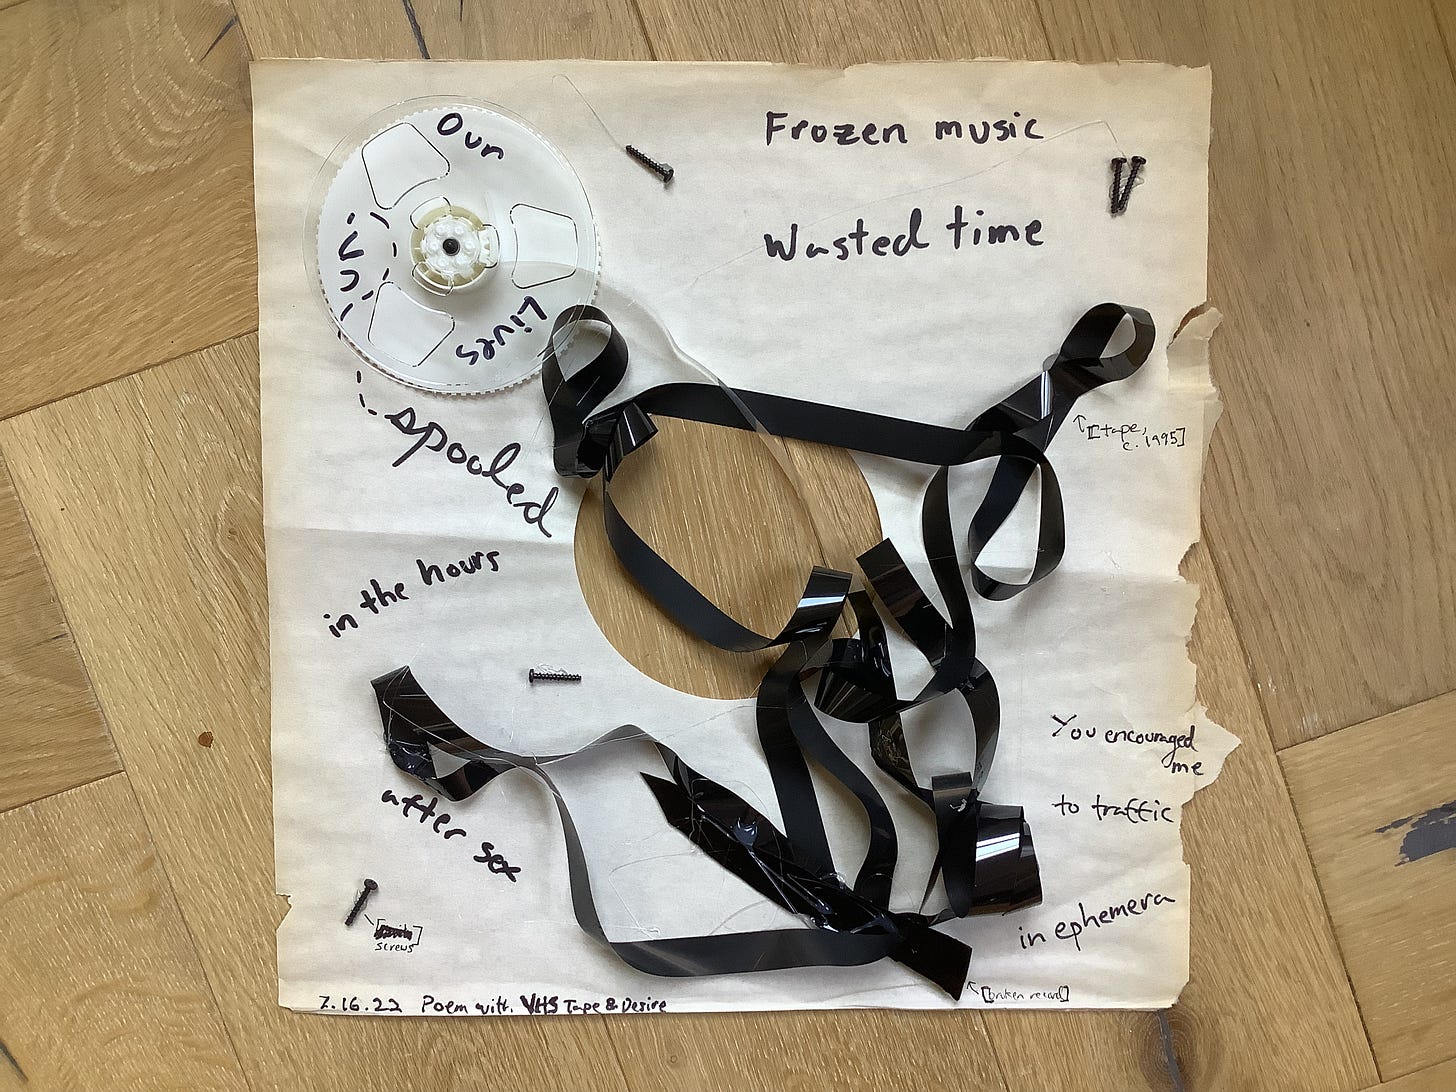 A visual poem with a VHS cassette, screws, and magnetic tape on thin paper from a record sleeve. On the left, text reads: “our lives un- / spooled / in the hours / after sex.” On the right, text reads: “Frozen music / wasted time / You encouraged me / to traffic / in ephemera.” On the bottom: “7.16.22 Poem with VHS Tape and Desire”